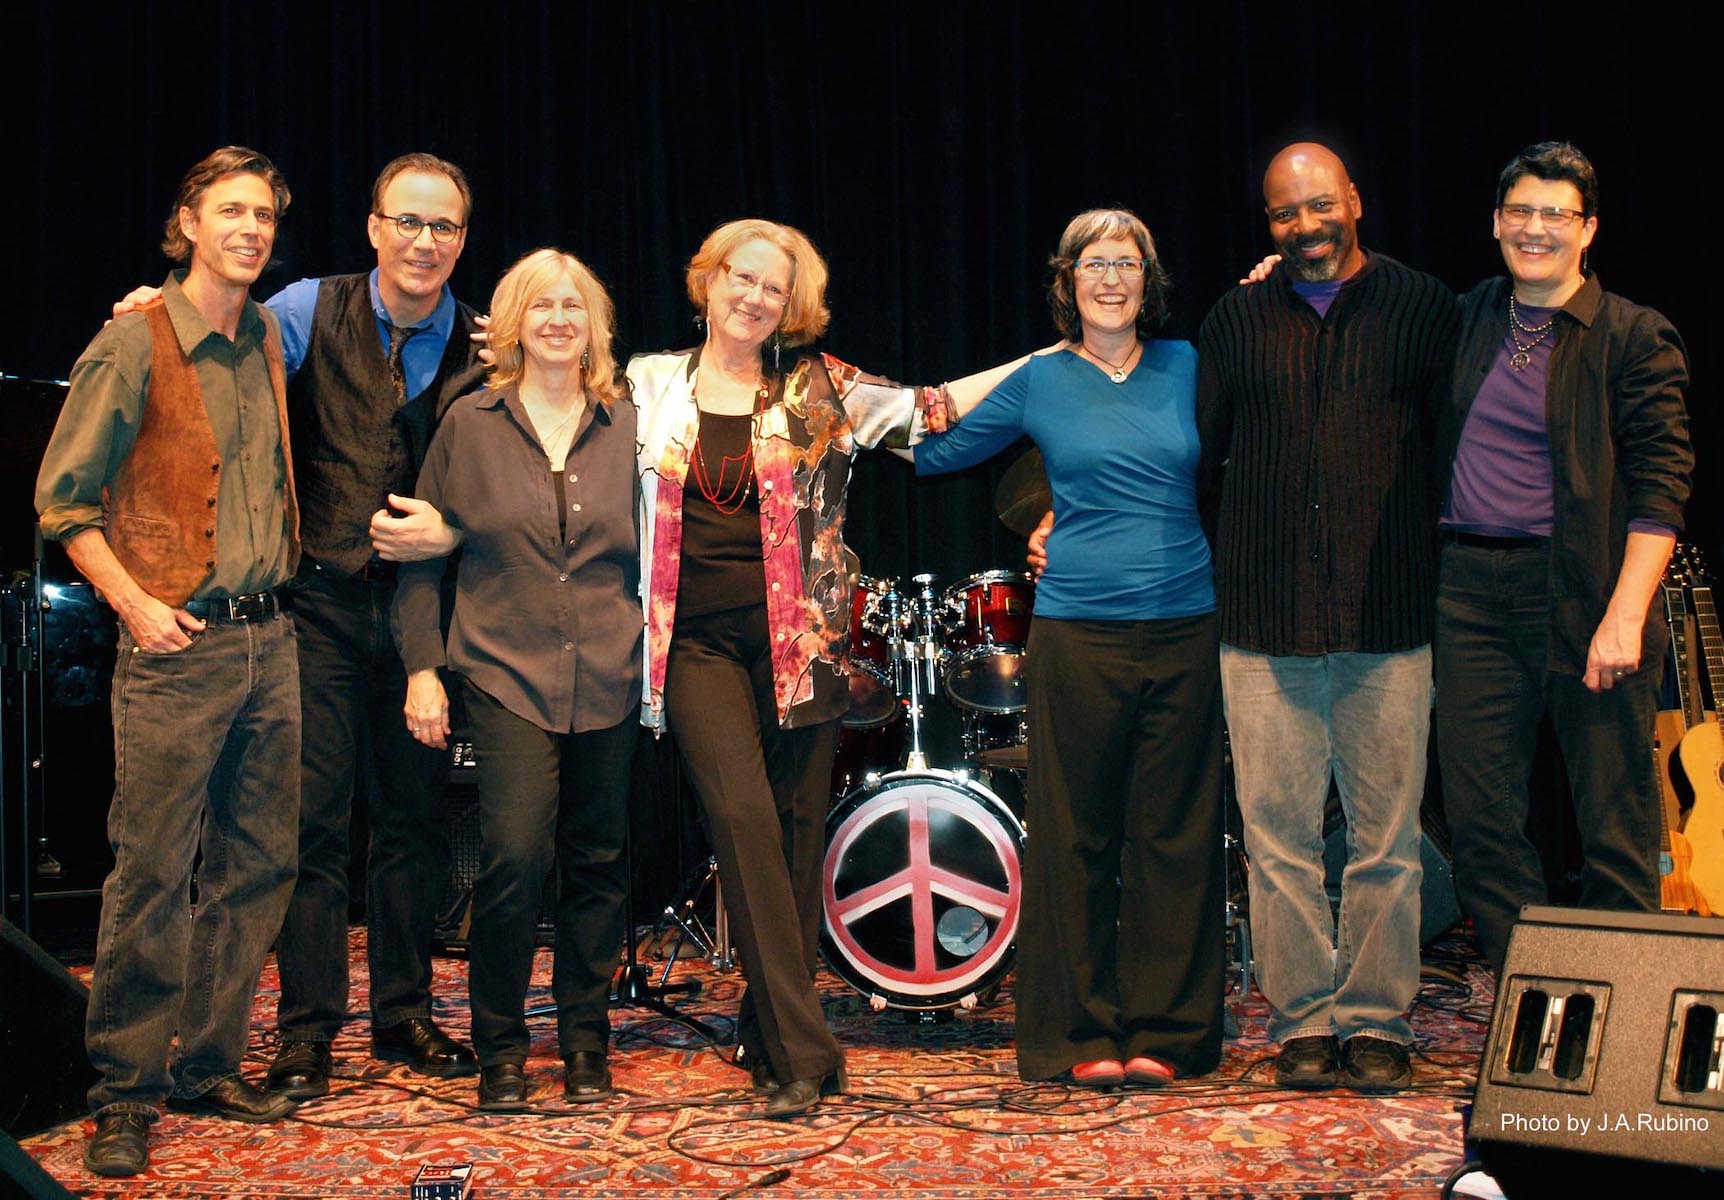 L-R: David Rokeach, John Bucchino, Jan Martinelli, Holly Near, Pat Humphries, Andre dos Santos Morgan, and Sandy O on the “Peace Becomes You” Tour, Freight & Salvage in Berkeley, CA, 2013. Photo Credit: J.A. Rubino. Photo courtesy of Holly Near.